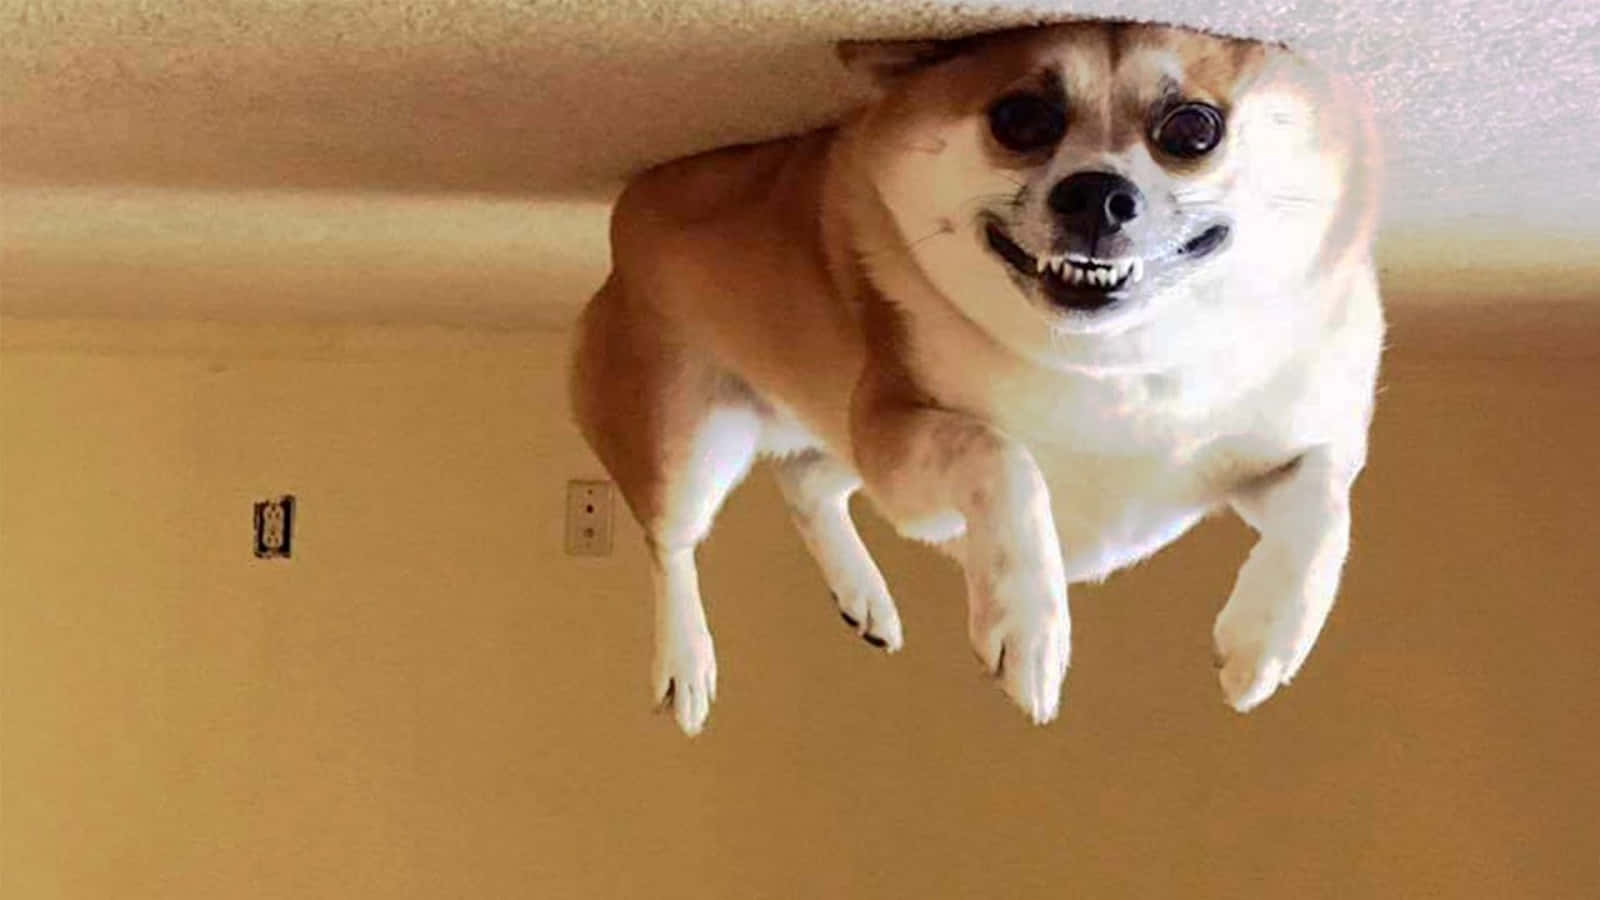 "Hilarious Moment Caught on Camera - a Dog's Life Full of Fun"